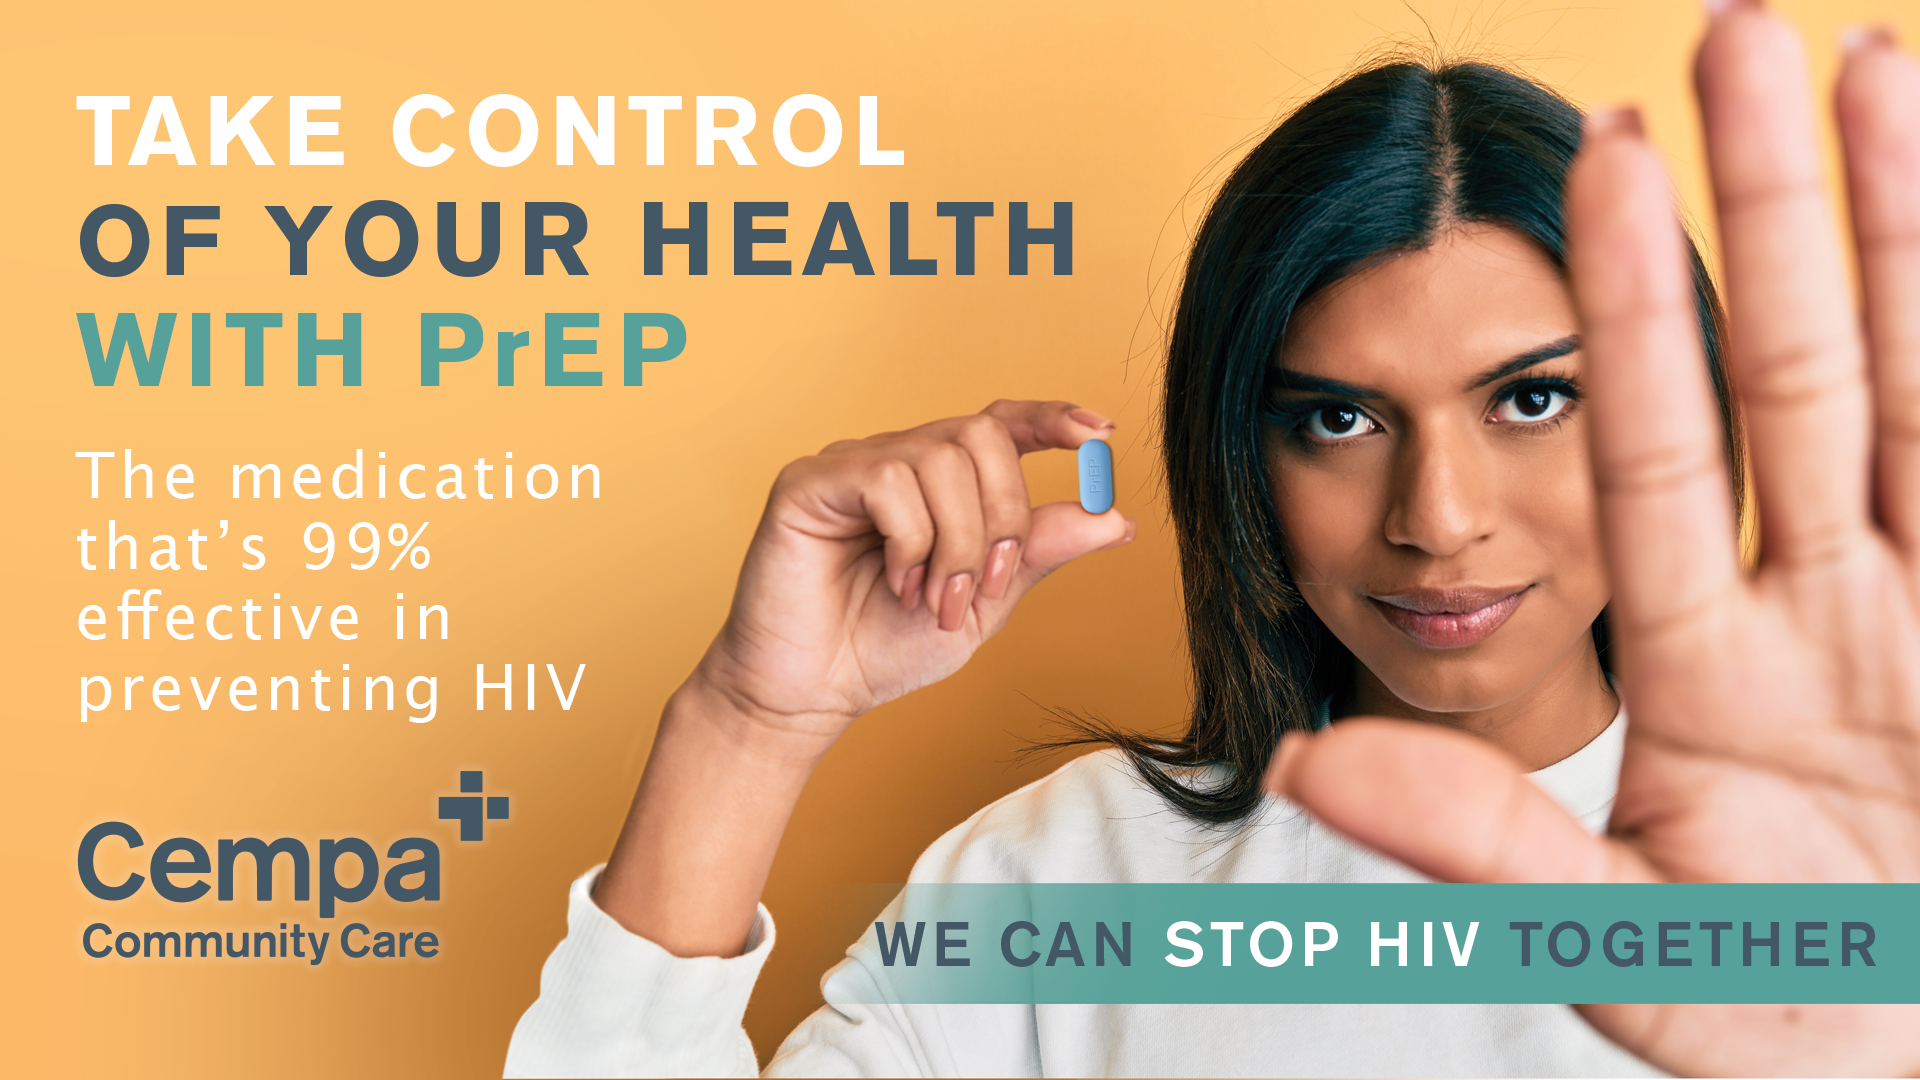 We Can STOP HIV Together